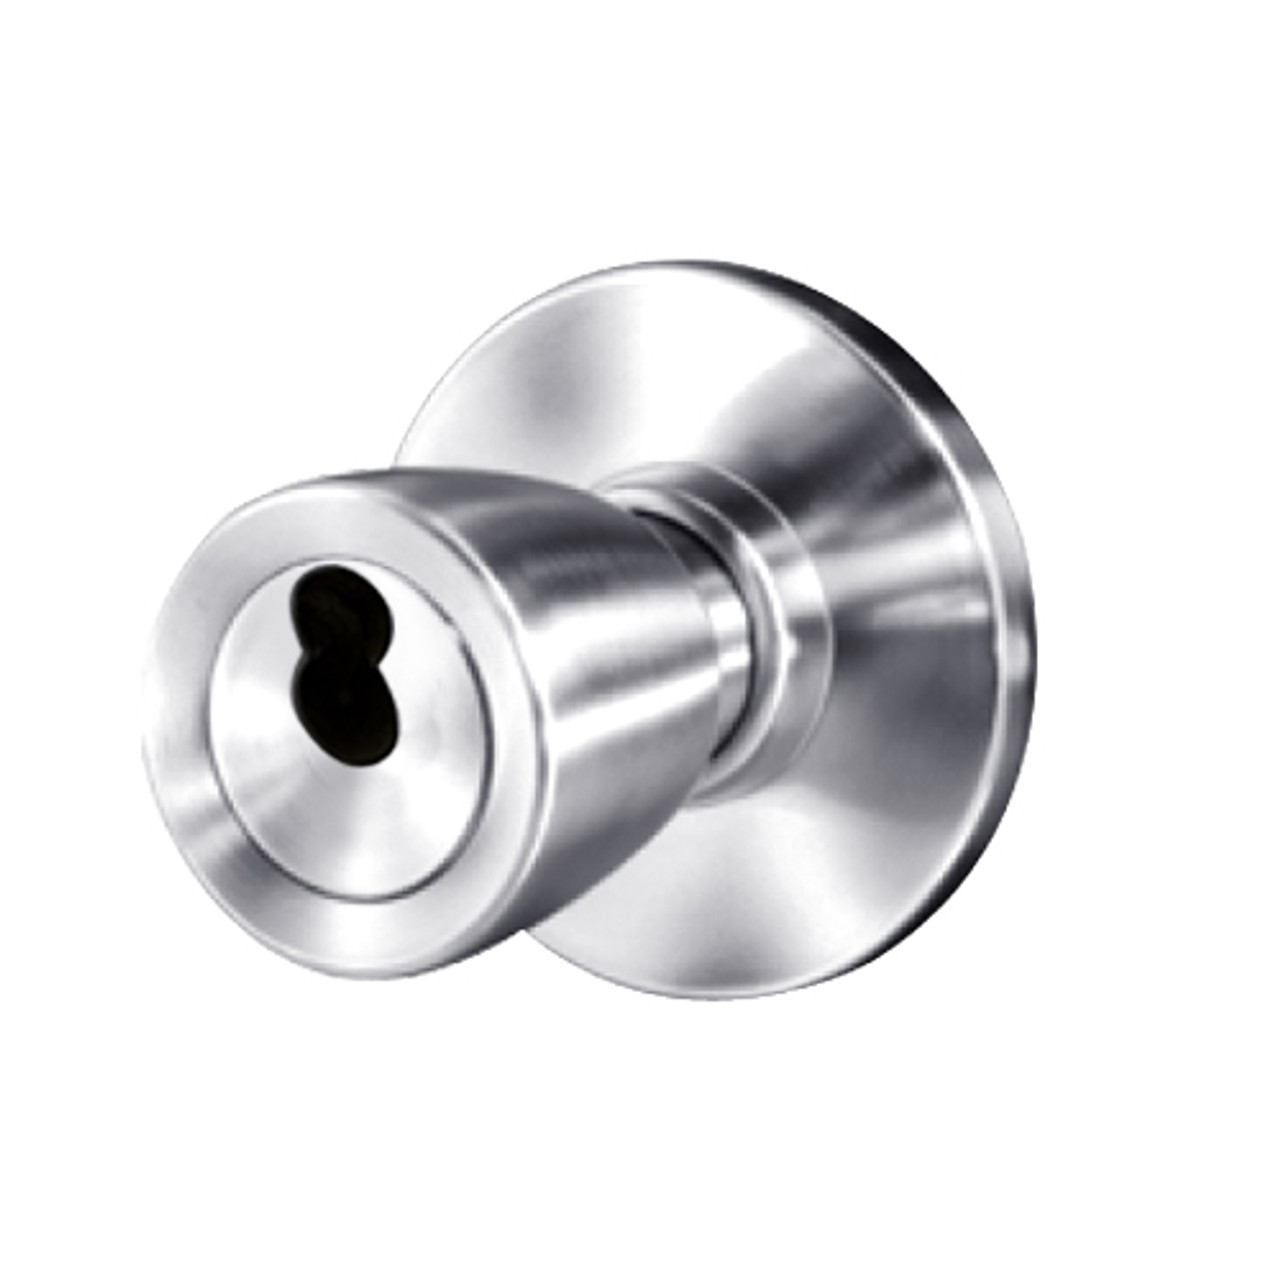 8K57YD6AS3625 Best 8K Series Exit Heavy Duty Cylindrical Knob Locks with Tulip Style in Bright Chrome